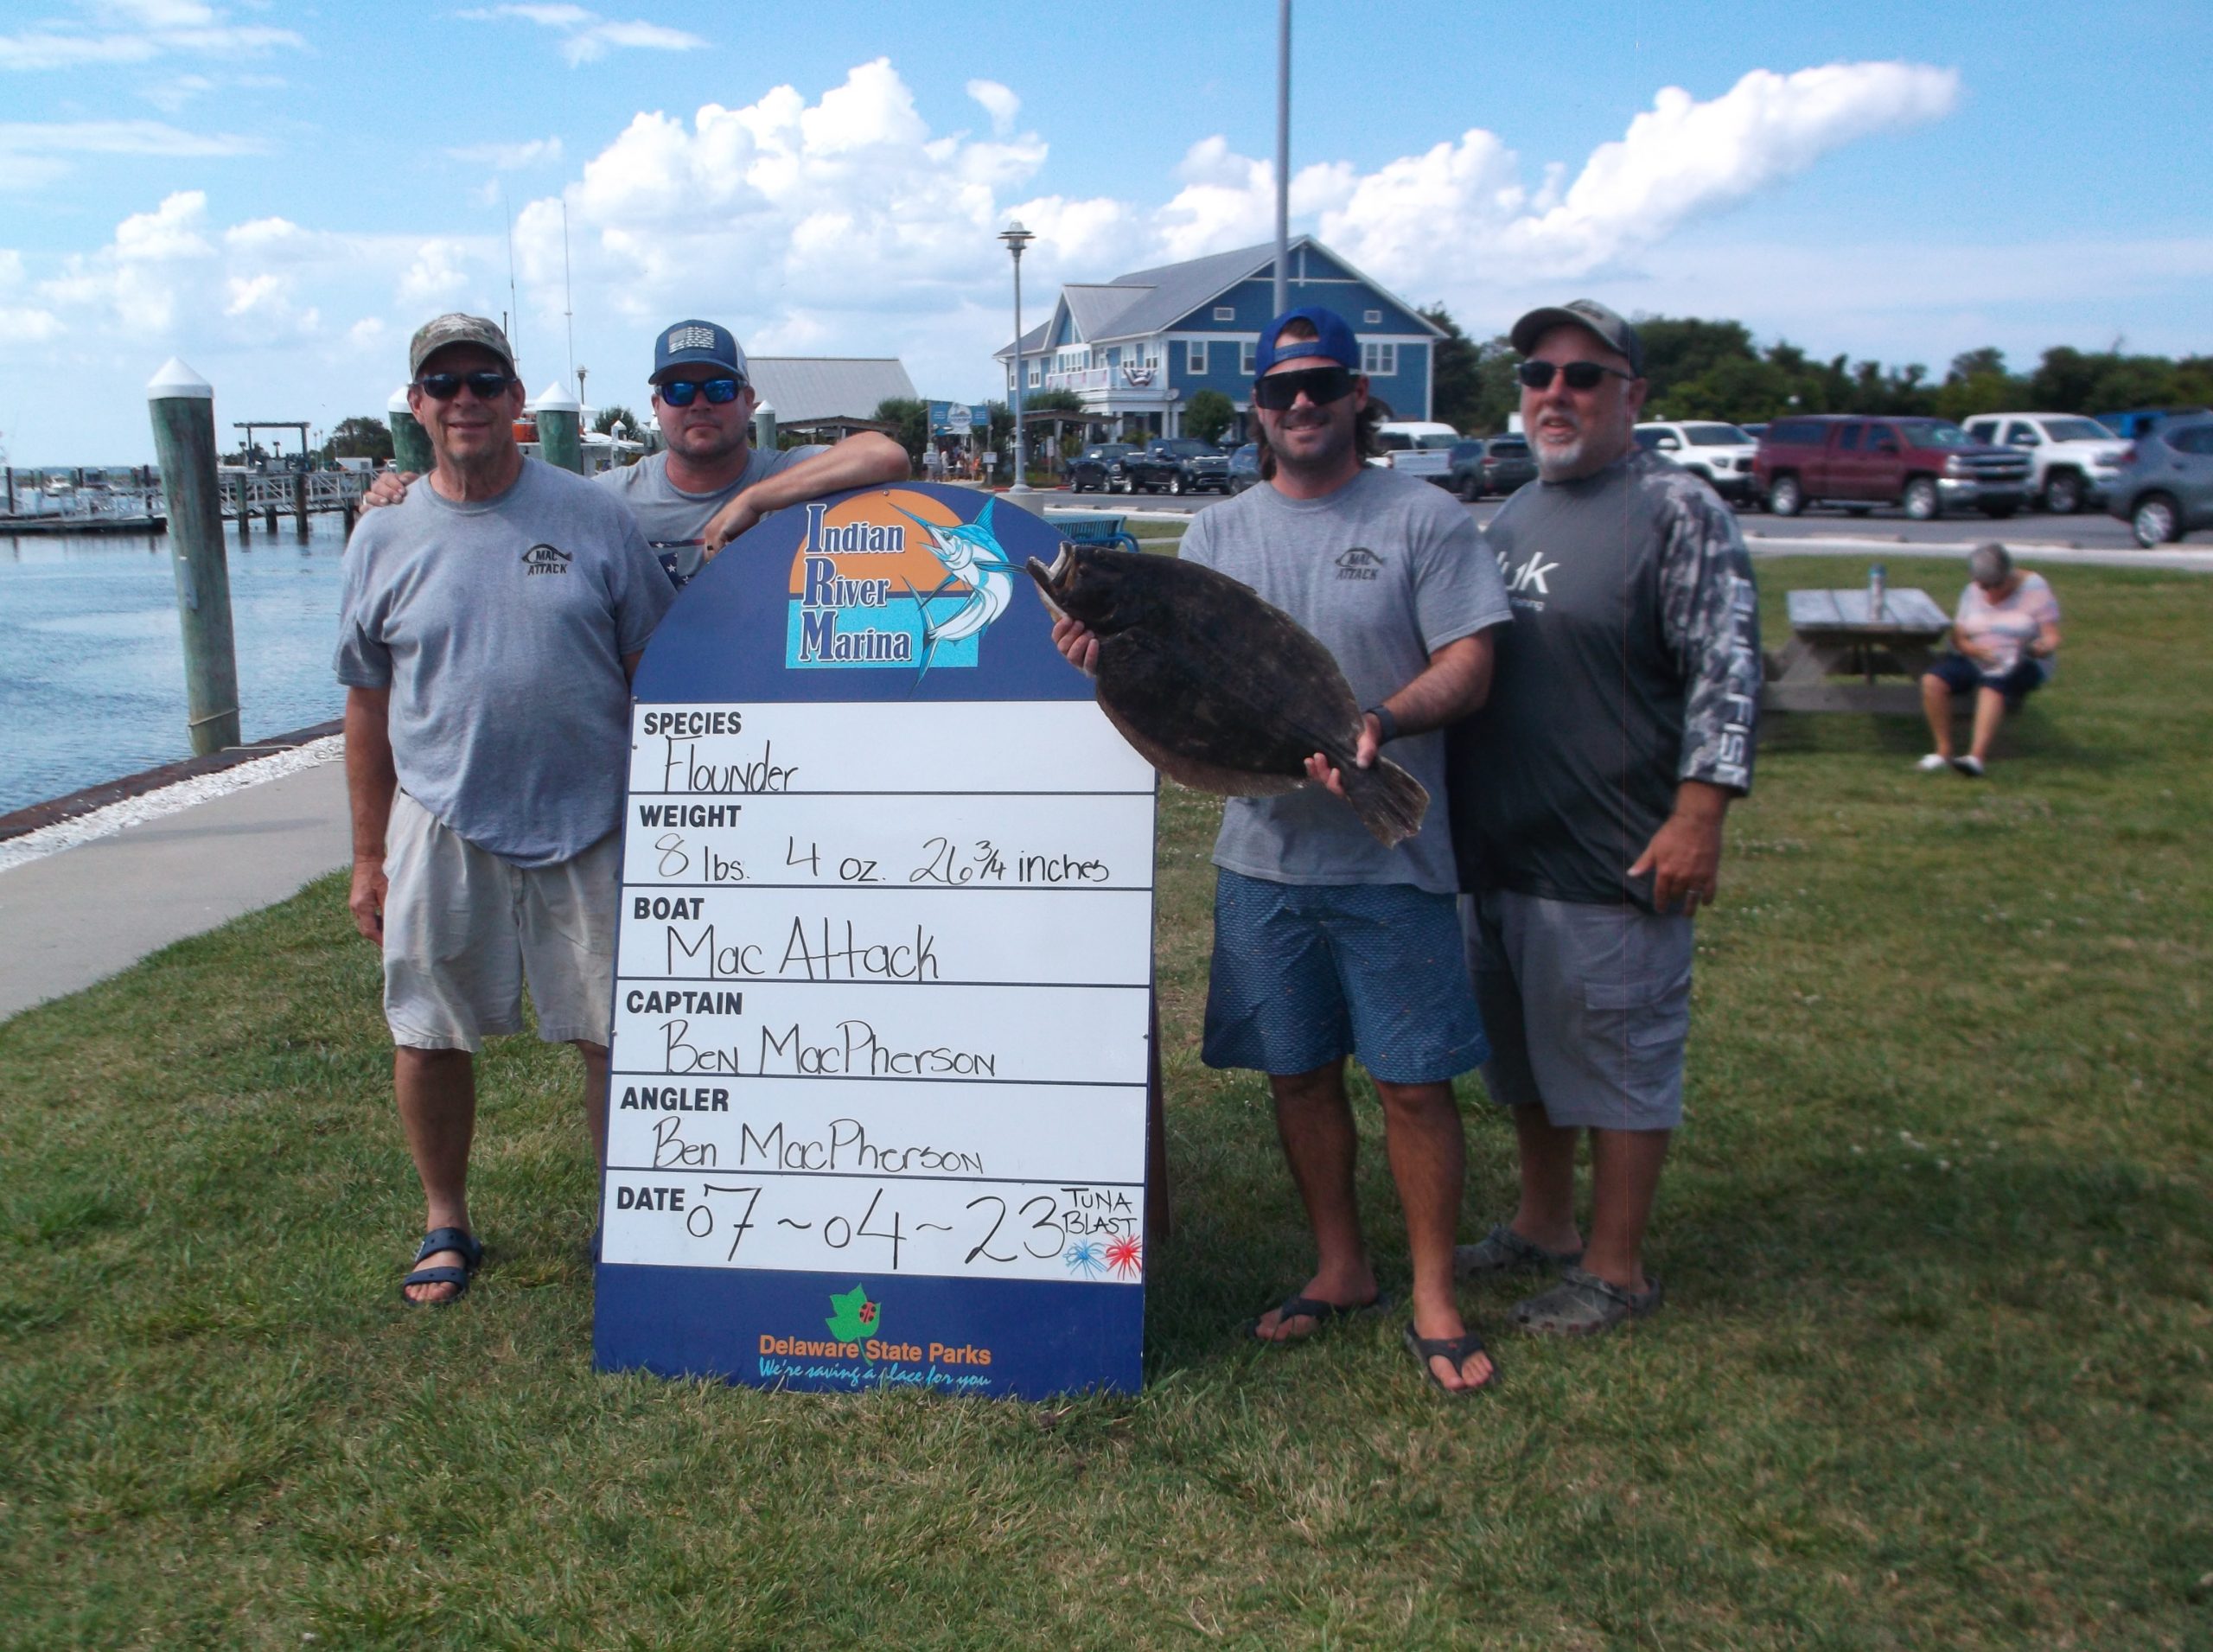 Indian River Marina - State of Delaware - Fishing Reports and Marina News